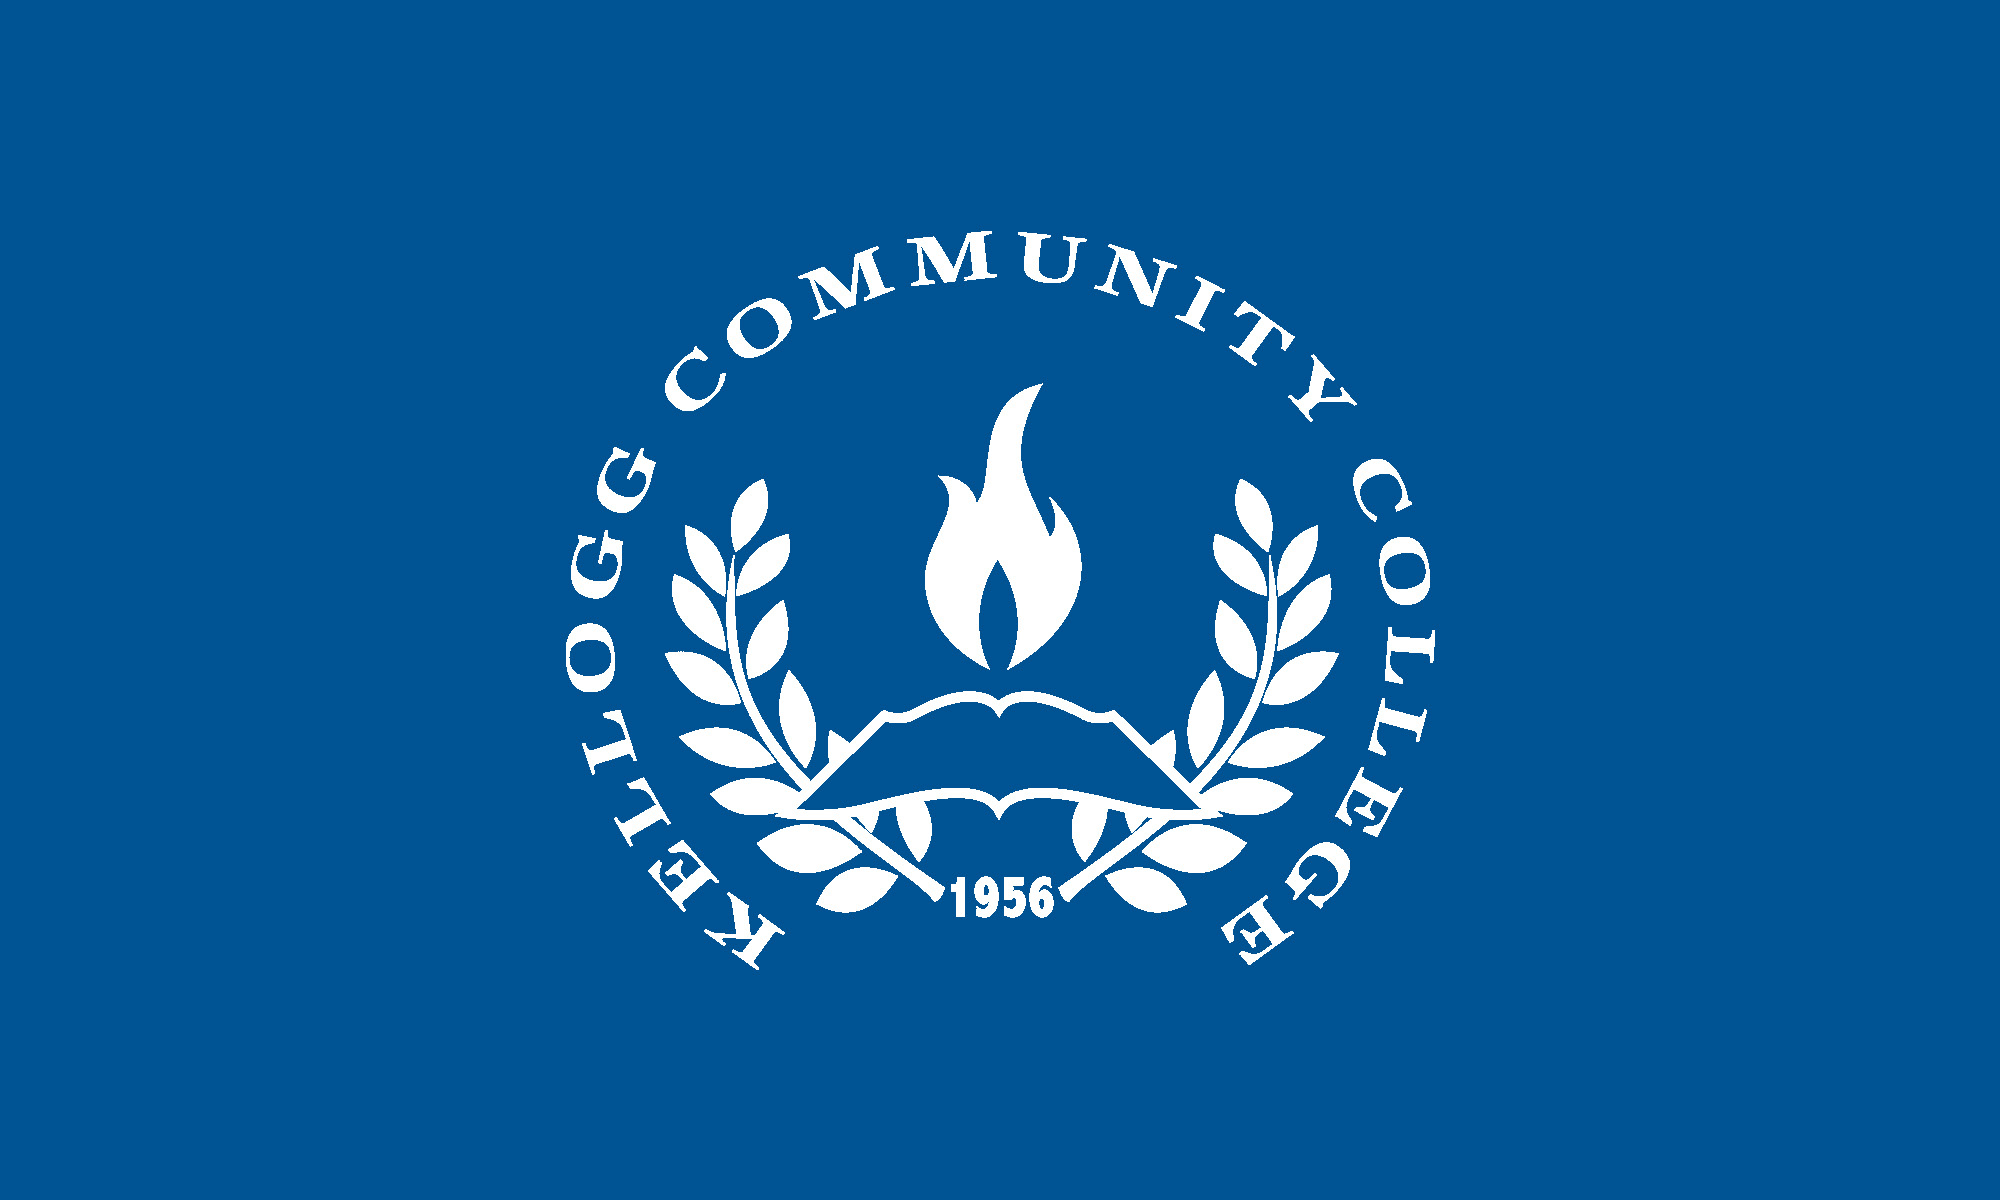 KCC's official seal in white on a blue background.